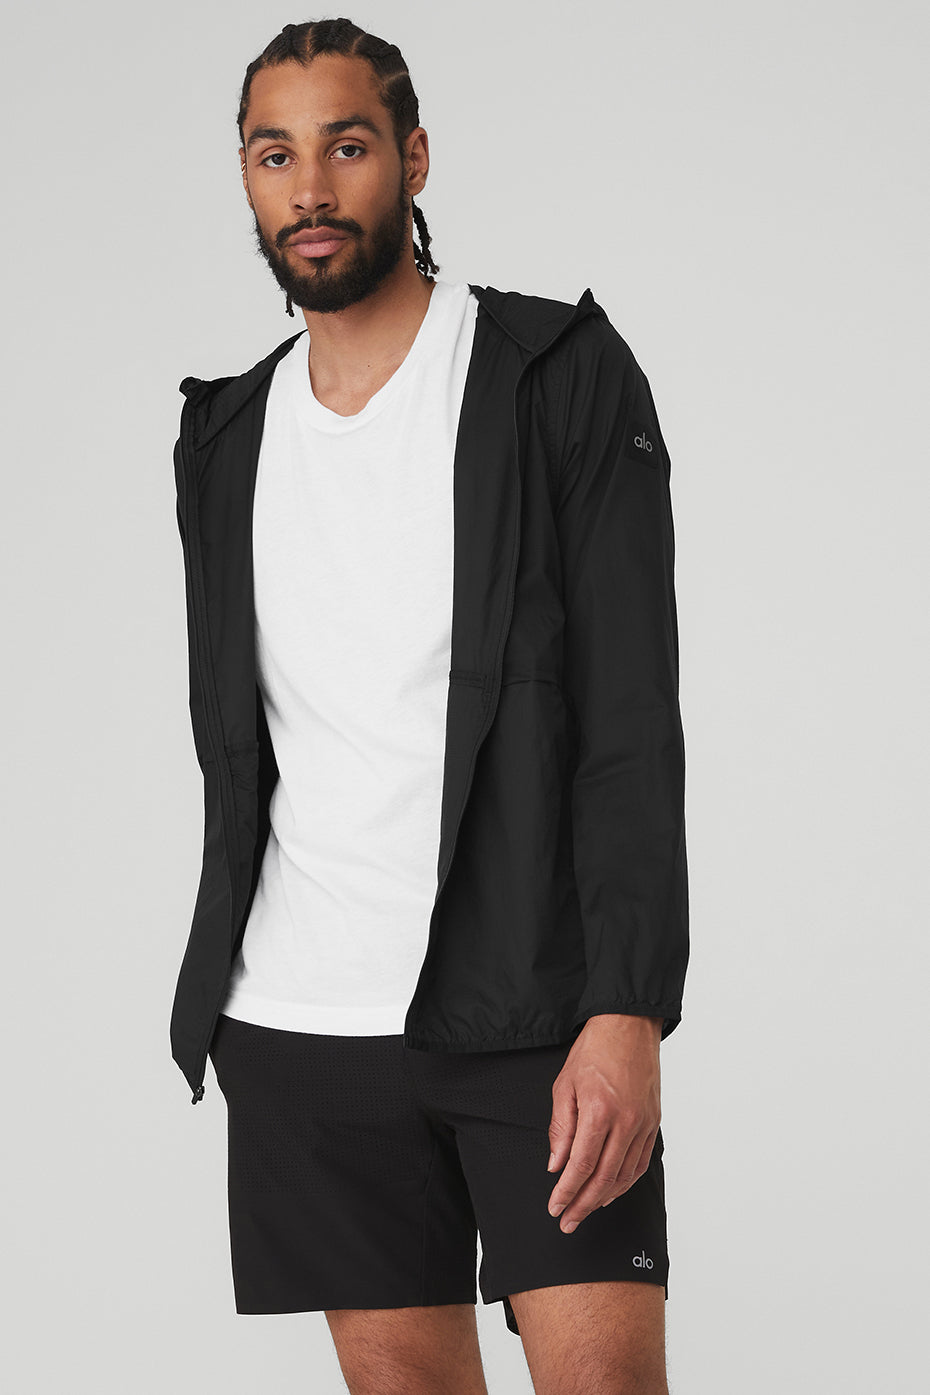 A Classic Jacket: Alo Contour Jacket, Fall Weather Is Here, So Bring One  of These 12 Jackets When You Go Running